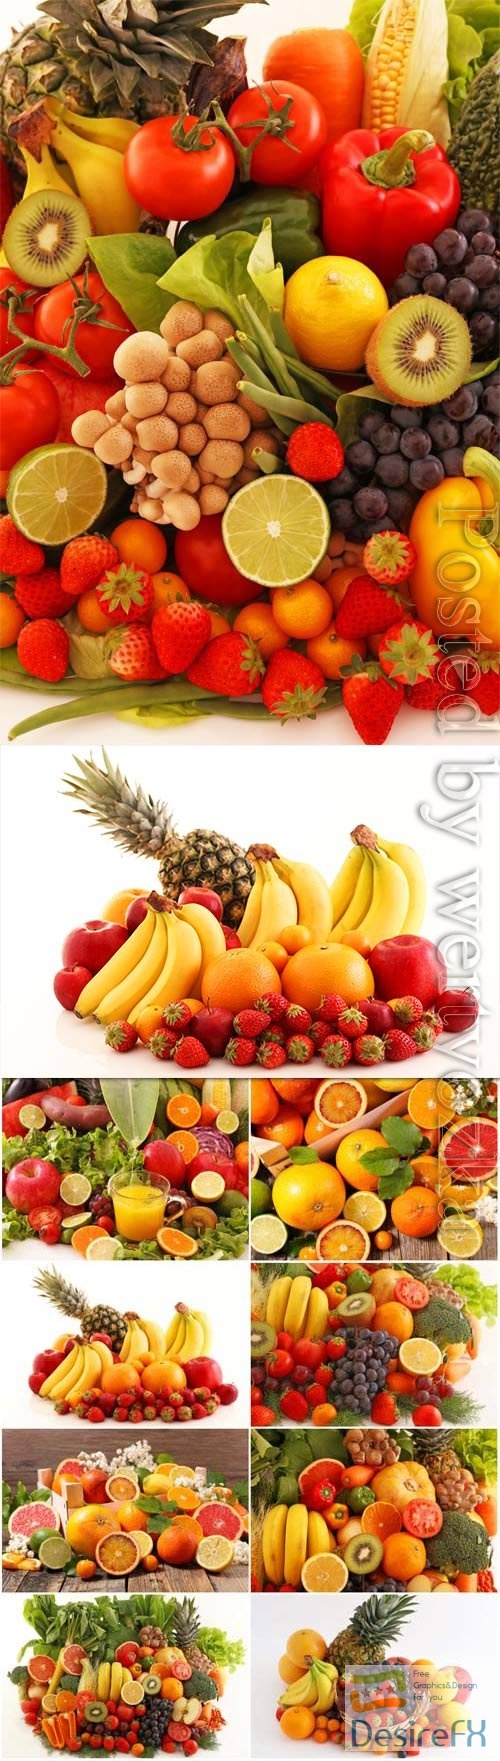 Set of fresh fruits and berries stock photo